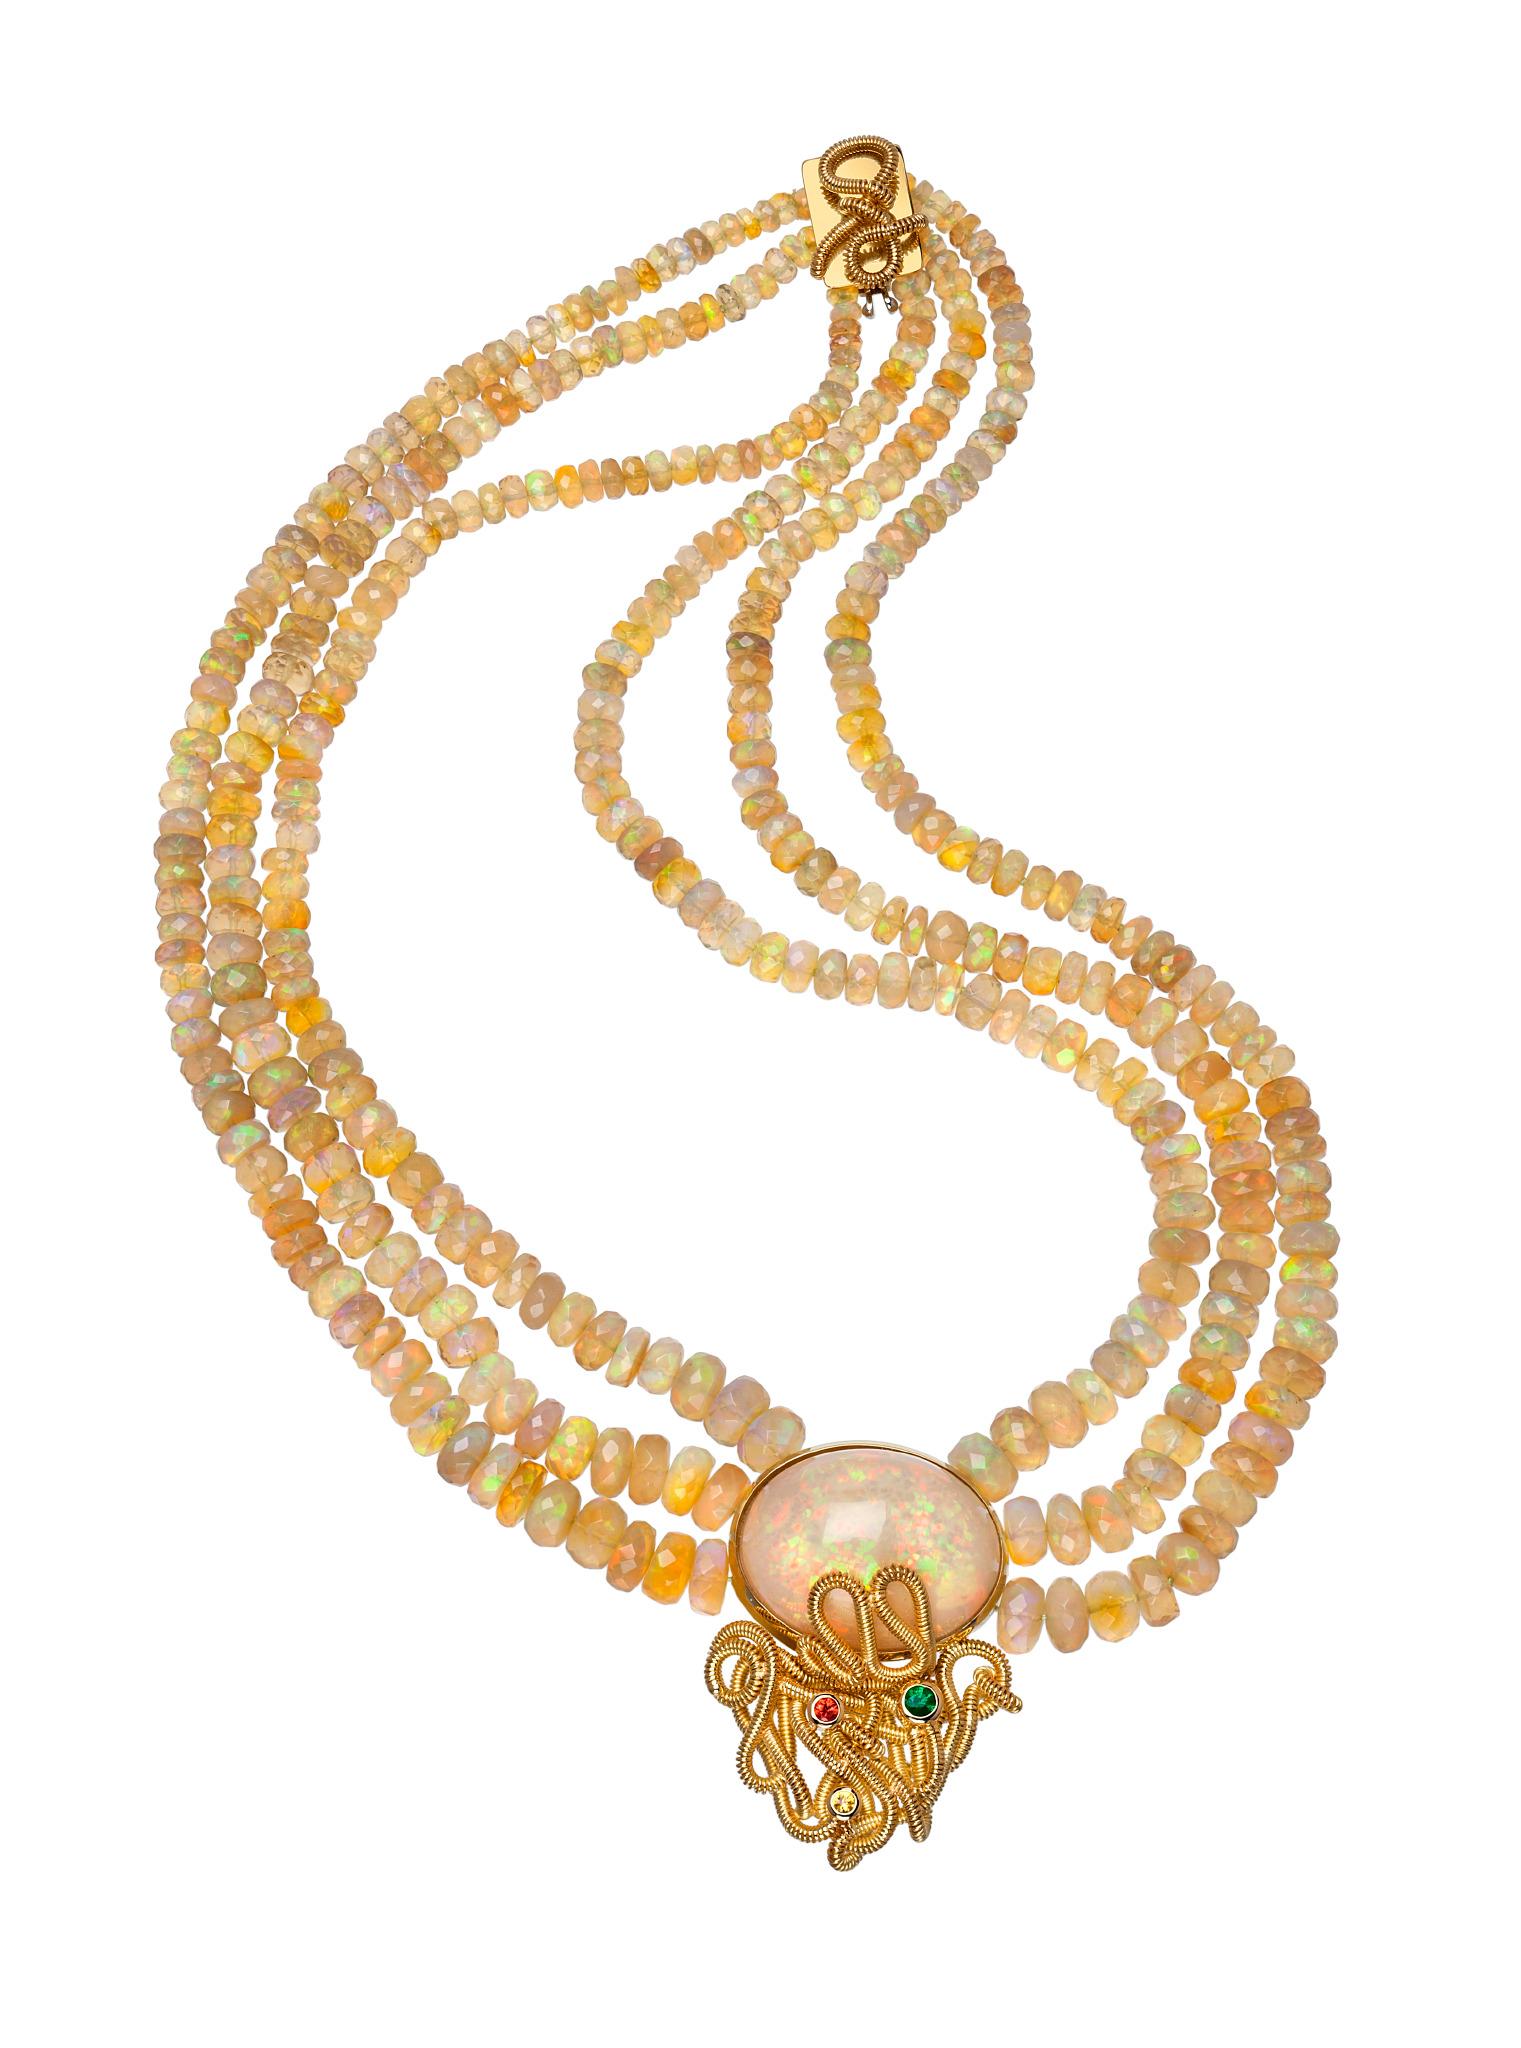 Contemporary 18k Gold Oval Ethiopian Opal Necklace with Coloured Sapphires and Emeralds For Sale